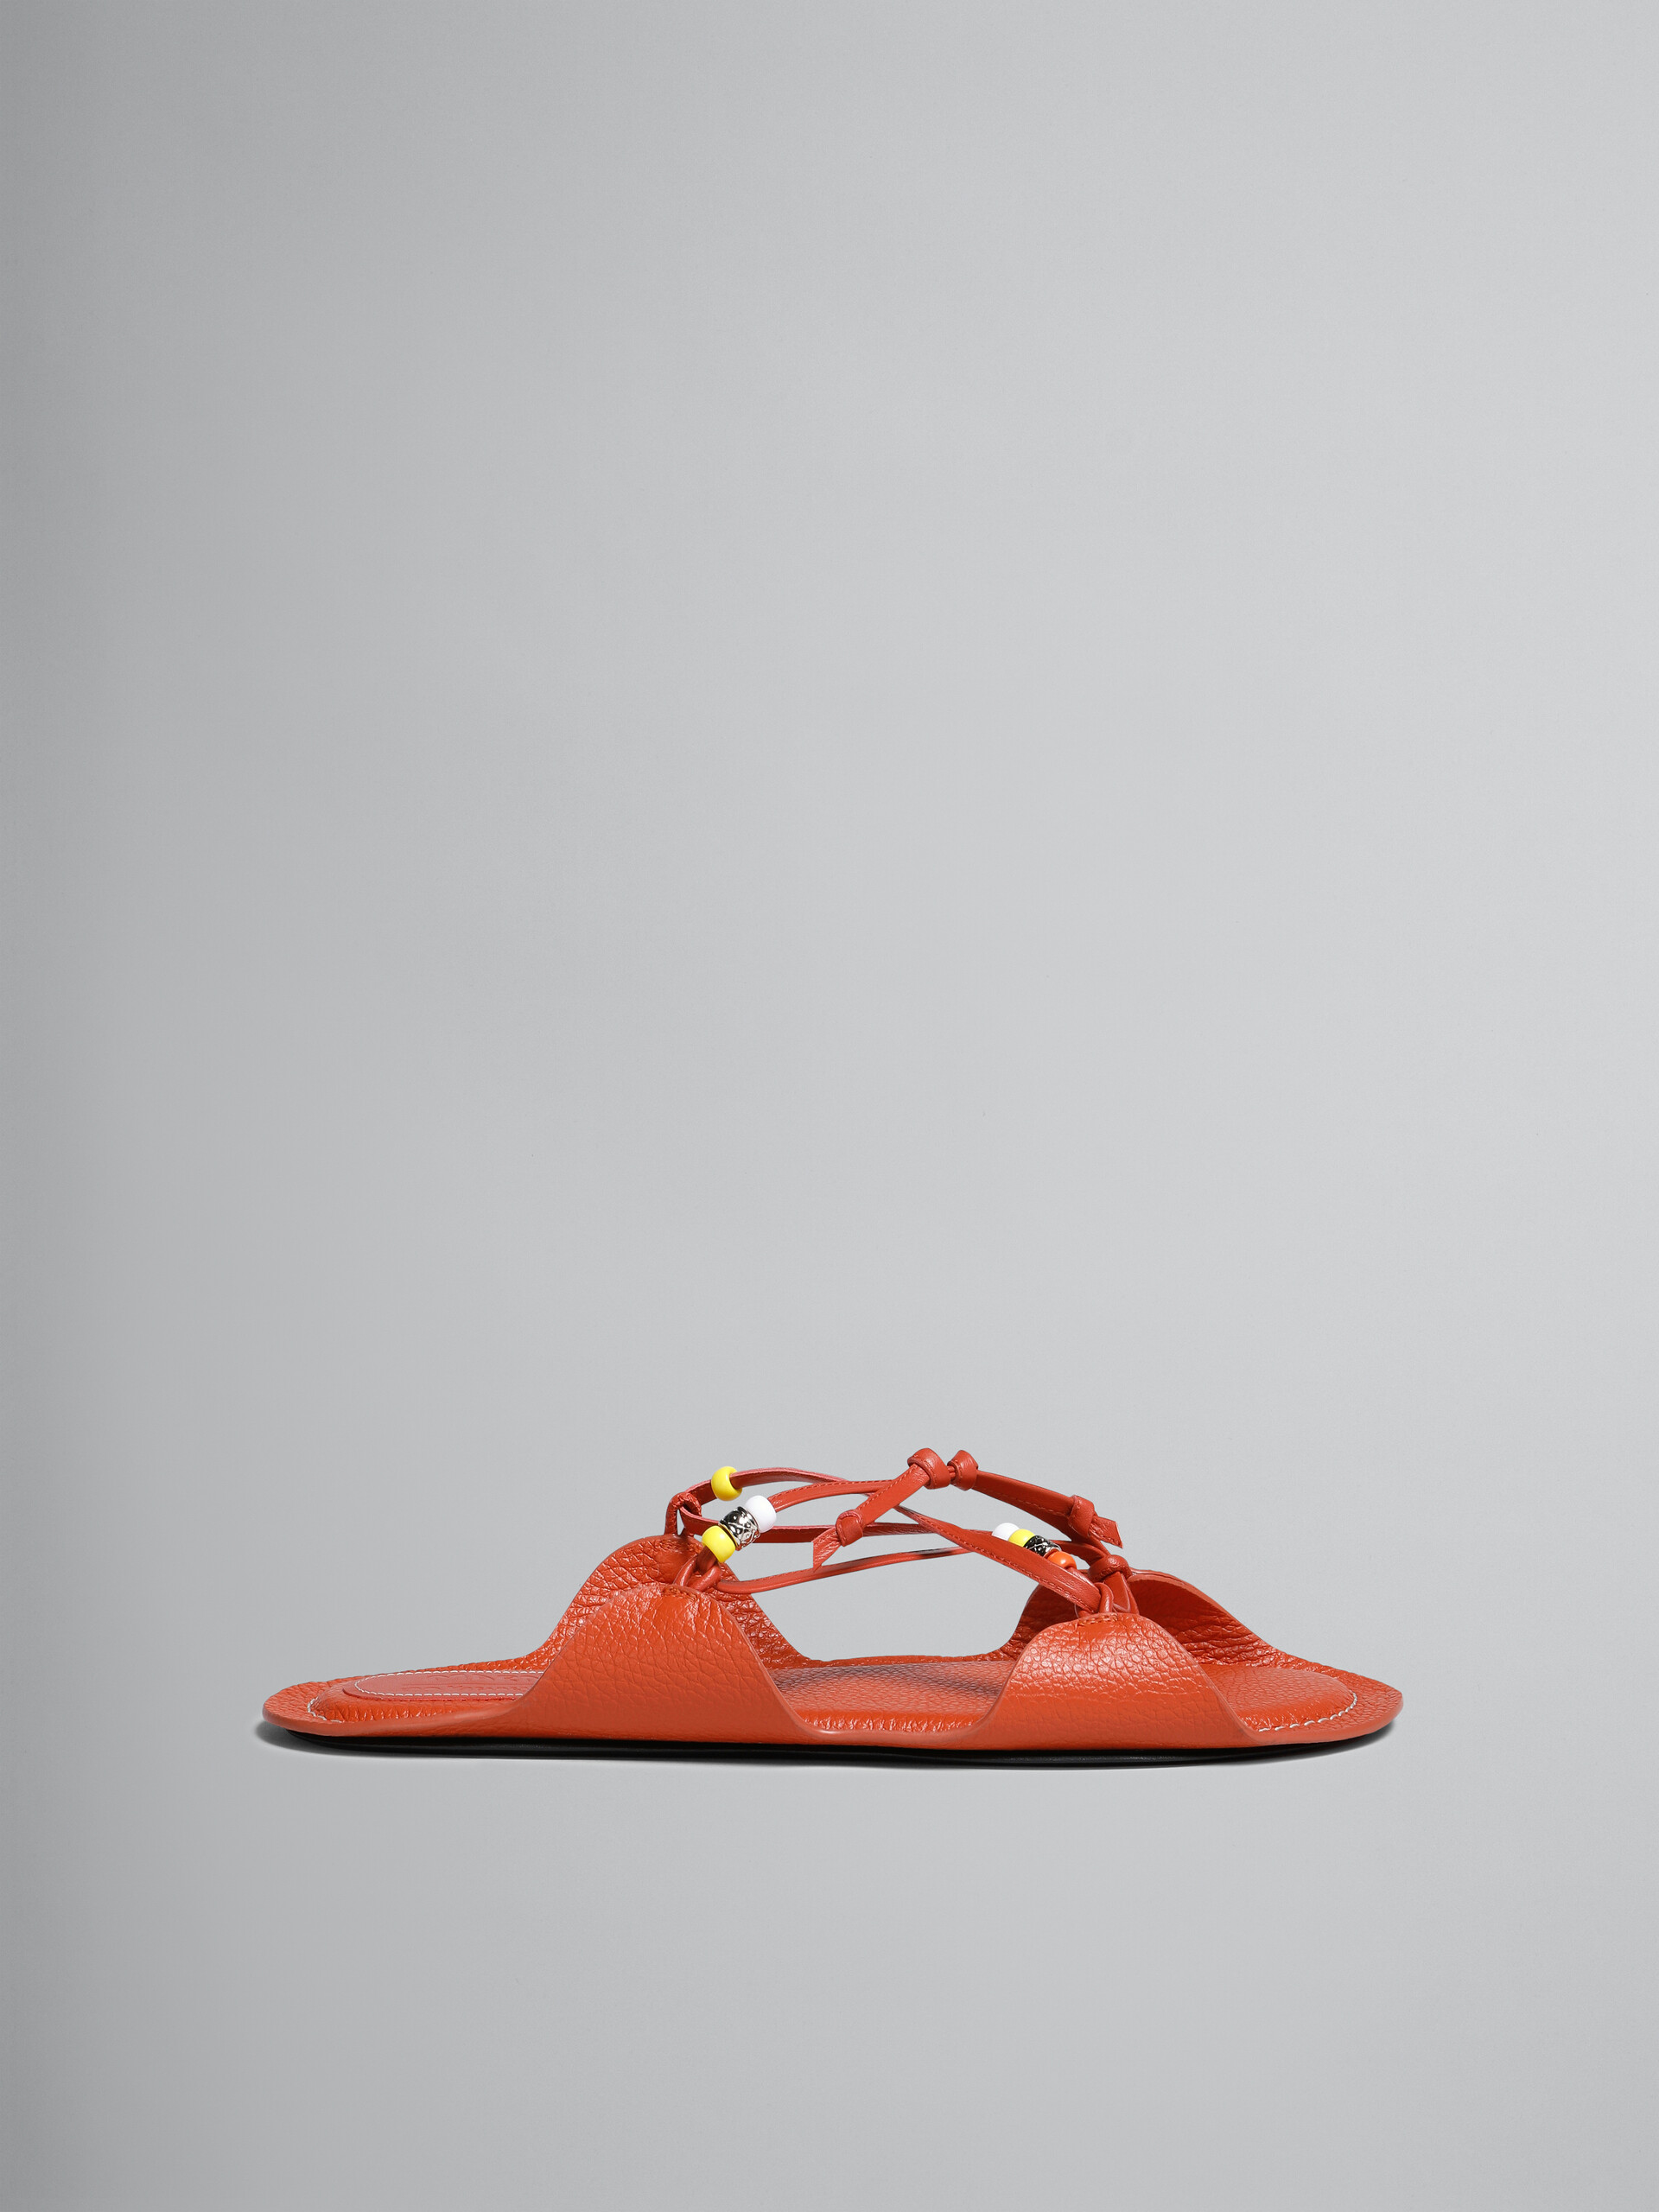 Marni x No Vacancy Inn - Brick red leather sandals with beads - Sandals - Image 1